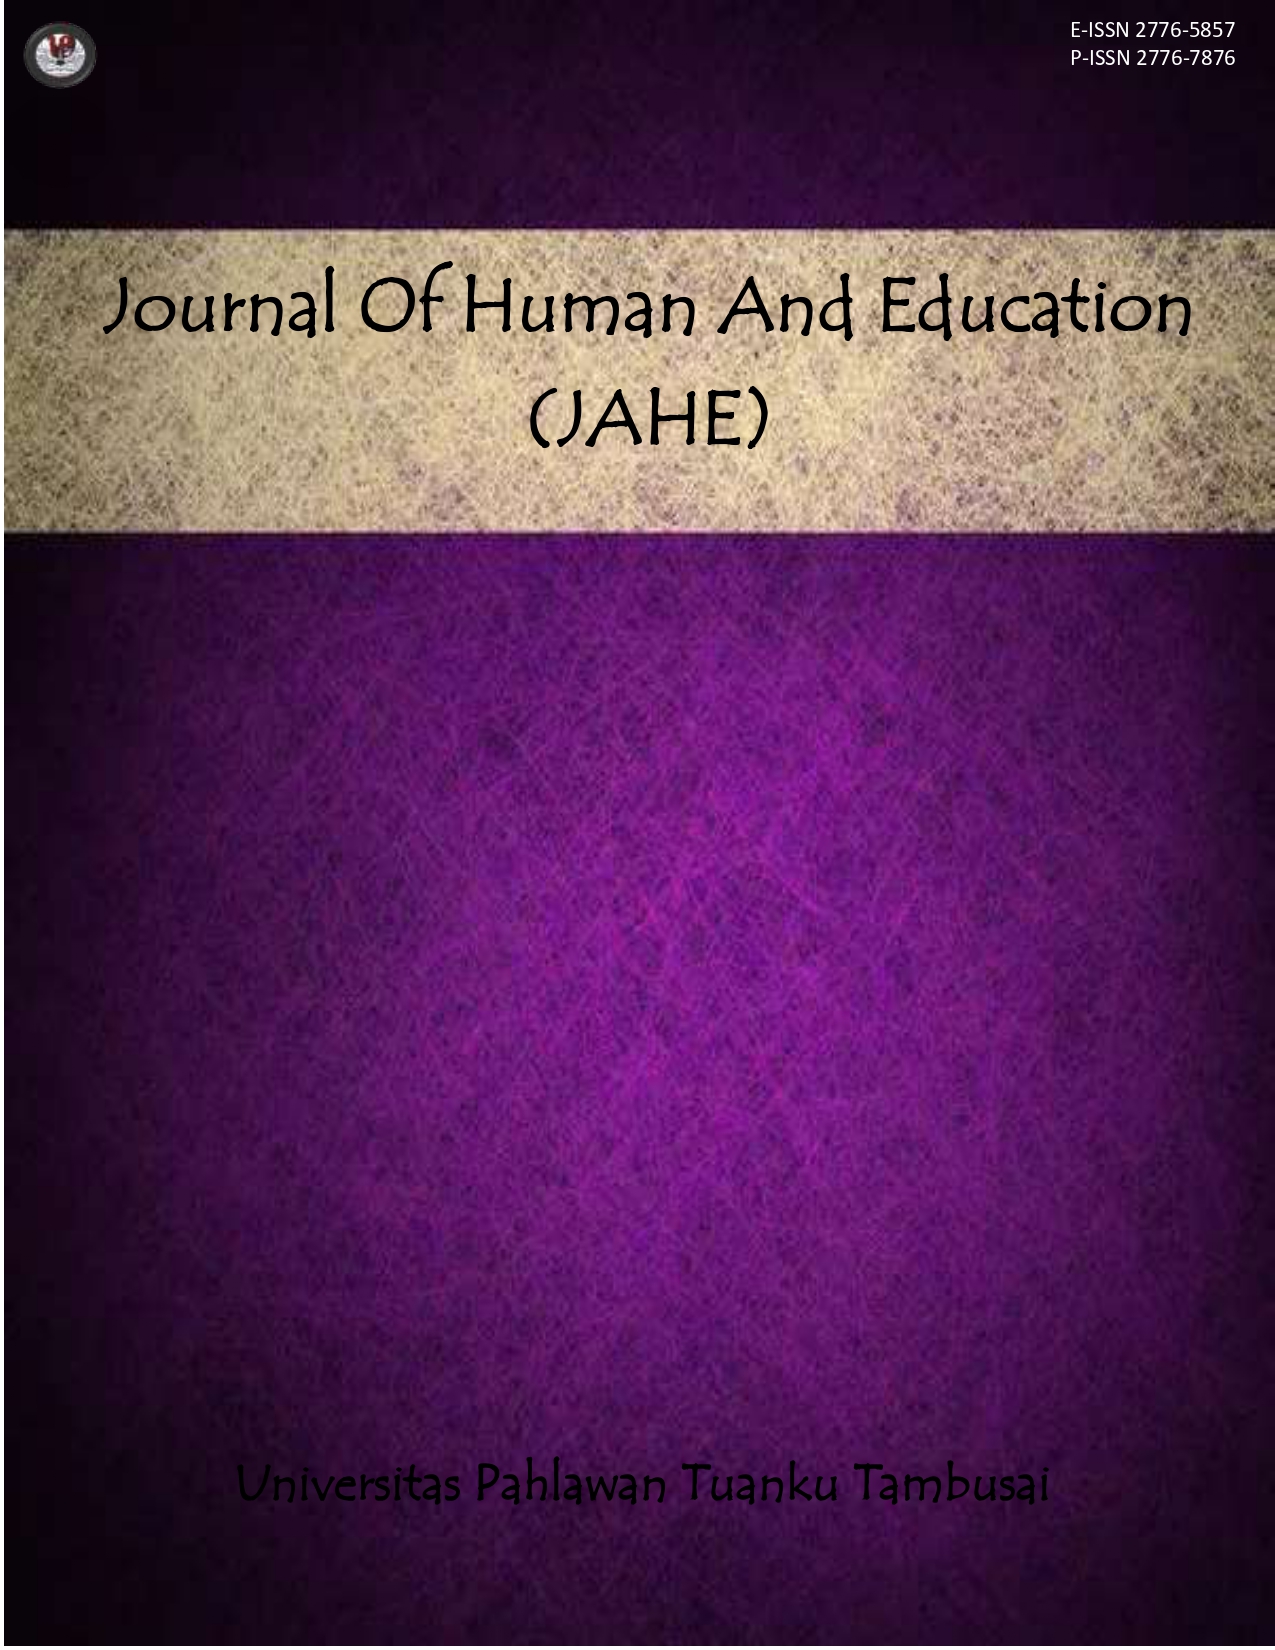 					View Vol. 2 No. 2 (2022): Journal of Human And Education (JAHE)
				